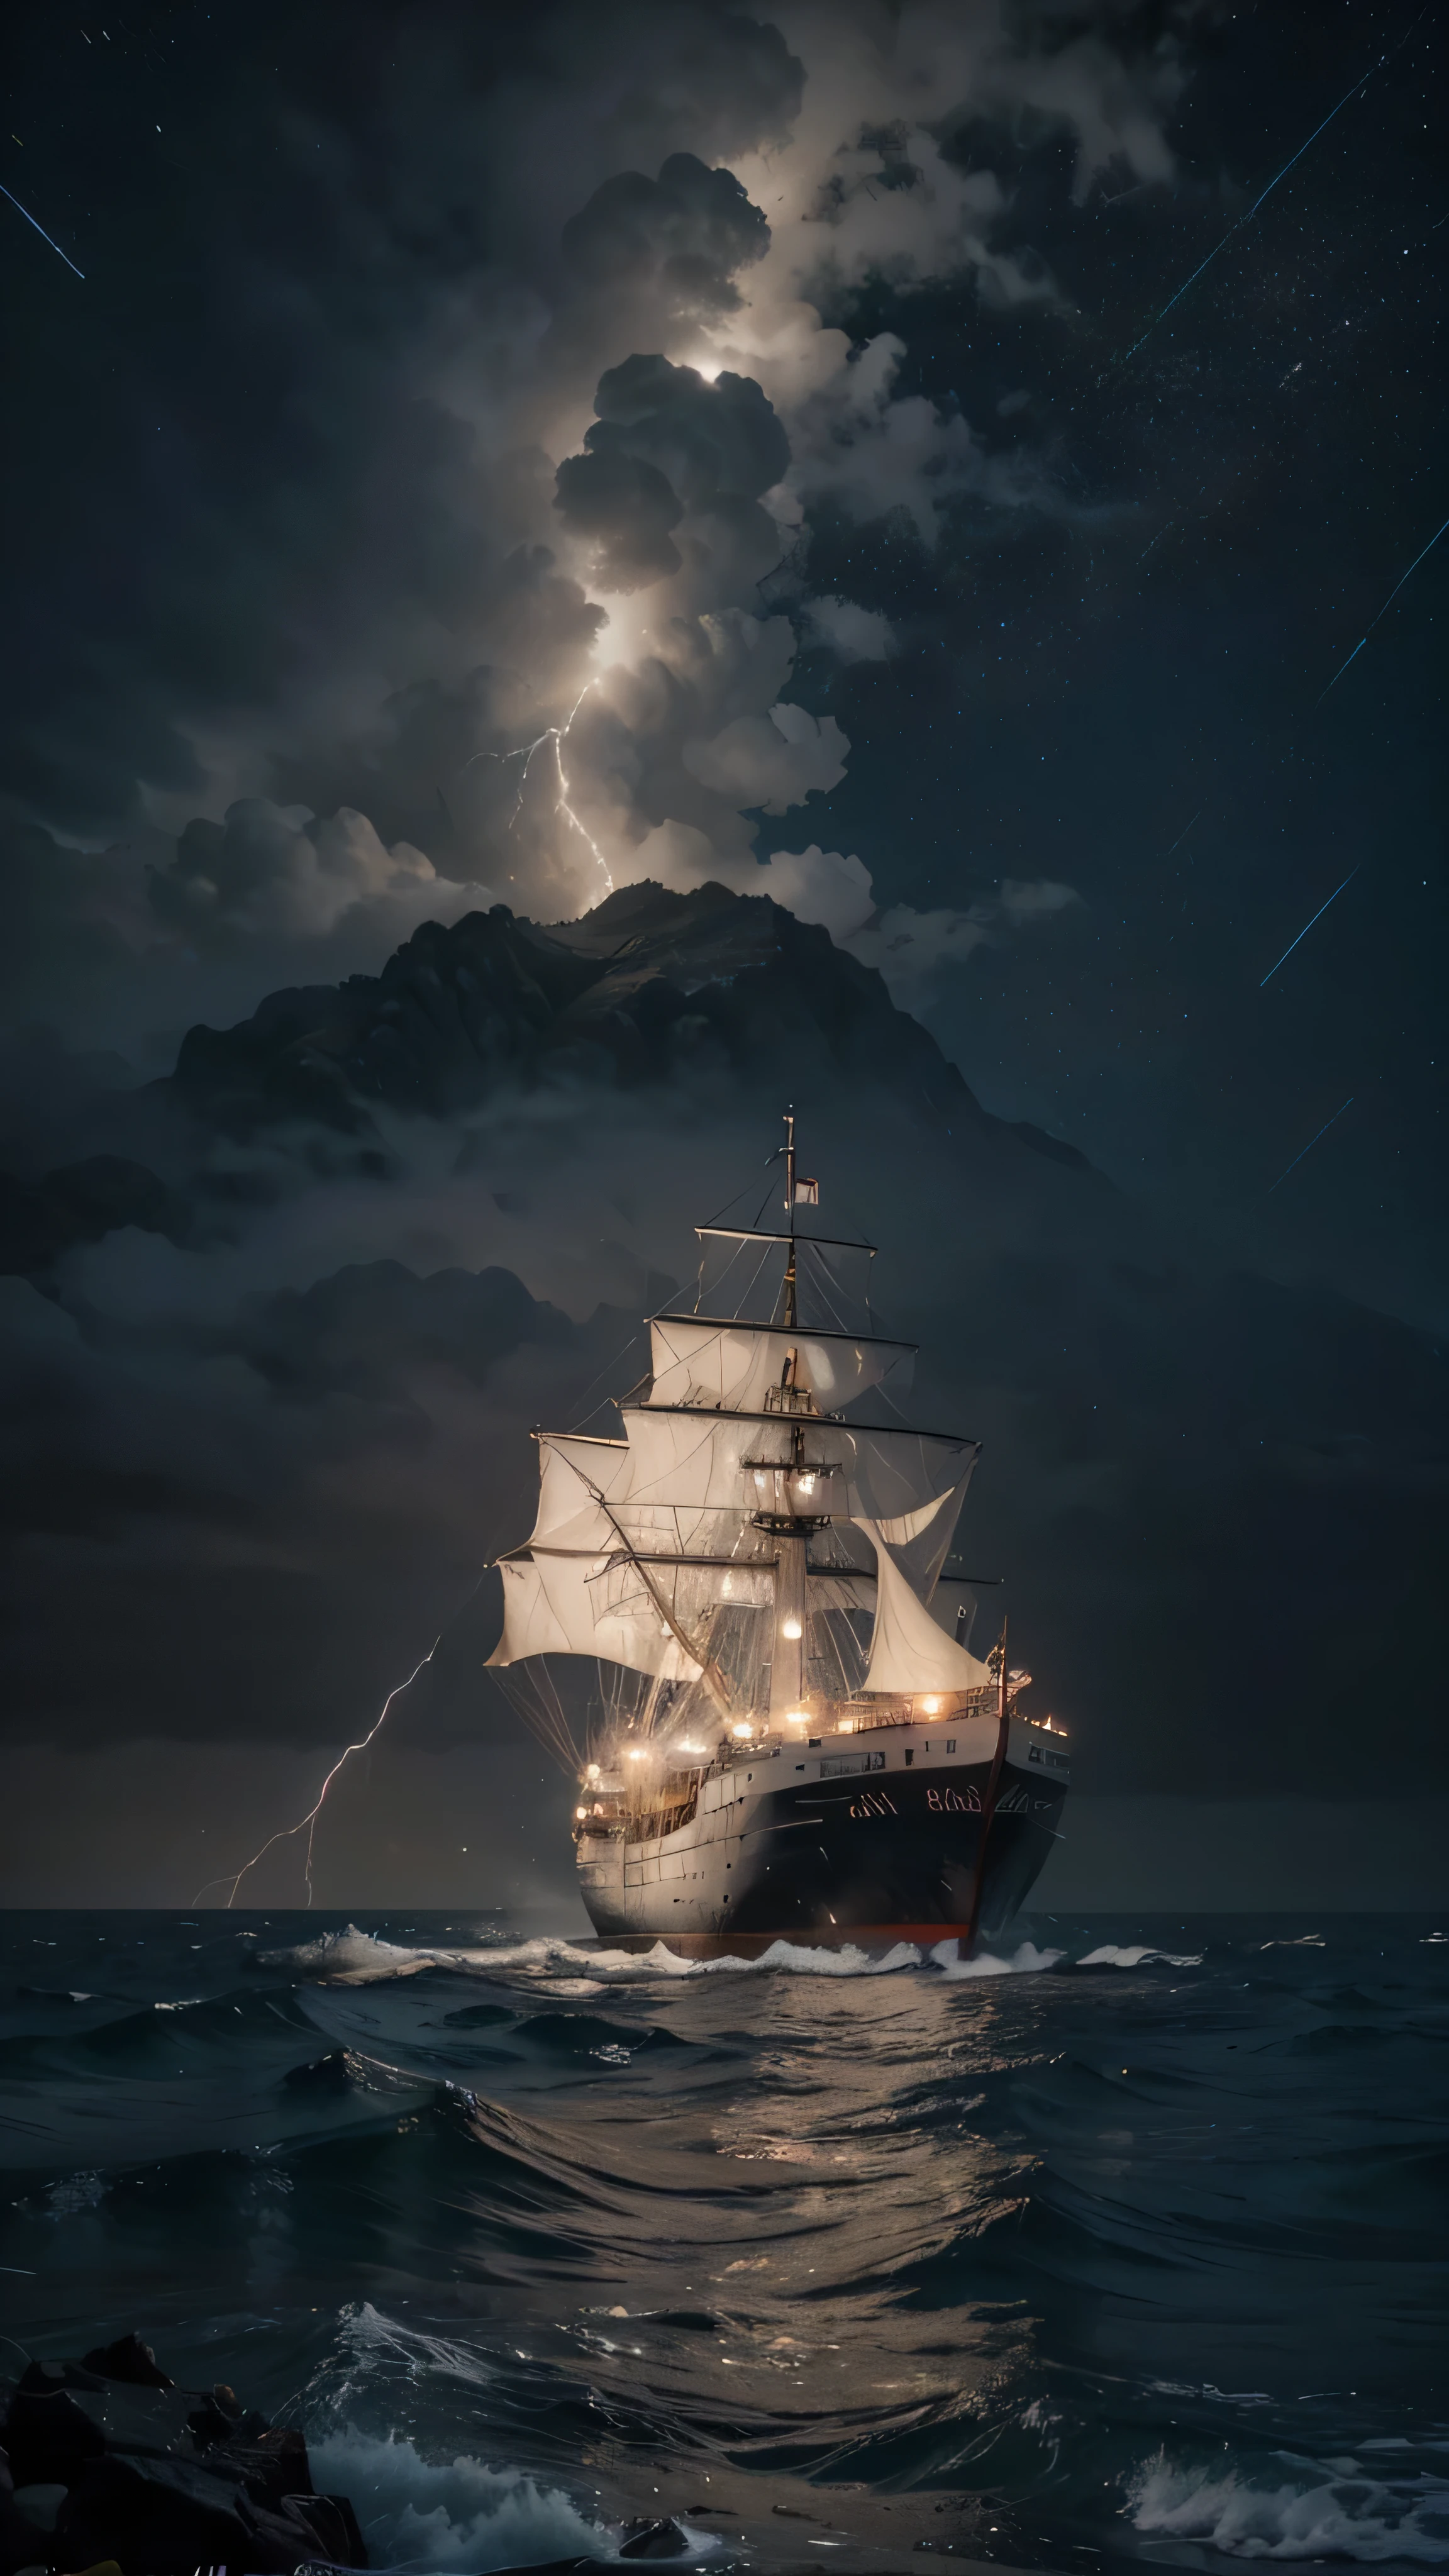 raw photo, large sailboat in the ocean off the coast ,on the shore there are palm trees and rocks and stones,изумрудная water,splatter ,water,ice,Snowfall,Element ,fantastic planets in the sky,"in the background there is a dark sky with lightning", nebula, galaxy, Focus, ultra-high quality, сверхдетализированный Focus,, high detail, 8K, photorealistic, Dazzling, Rule of thirds, depth of field, complex parts, Conceptual art, bright colors, futuristic design, Attention to detail, grandeur and awe, A stunning visual masterpiece, , hard light,